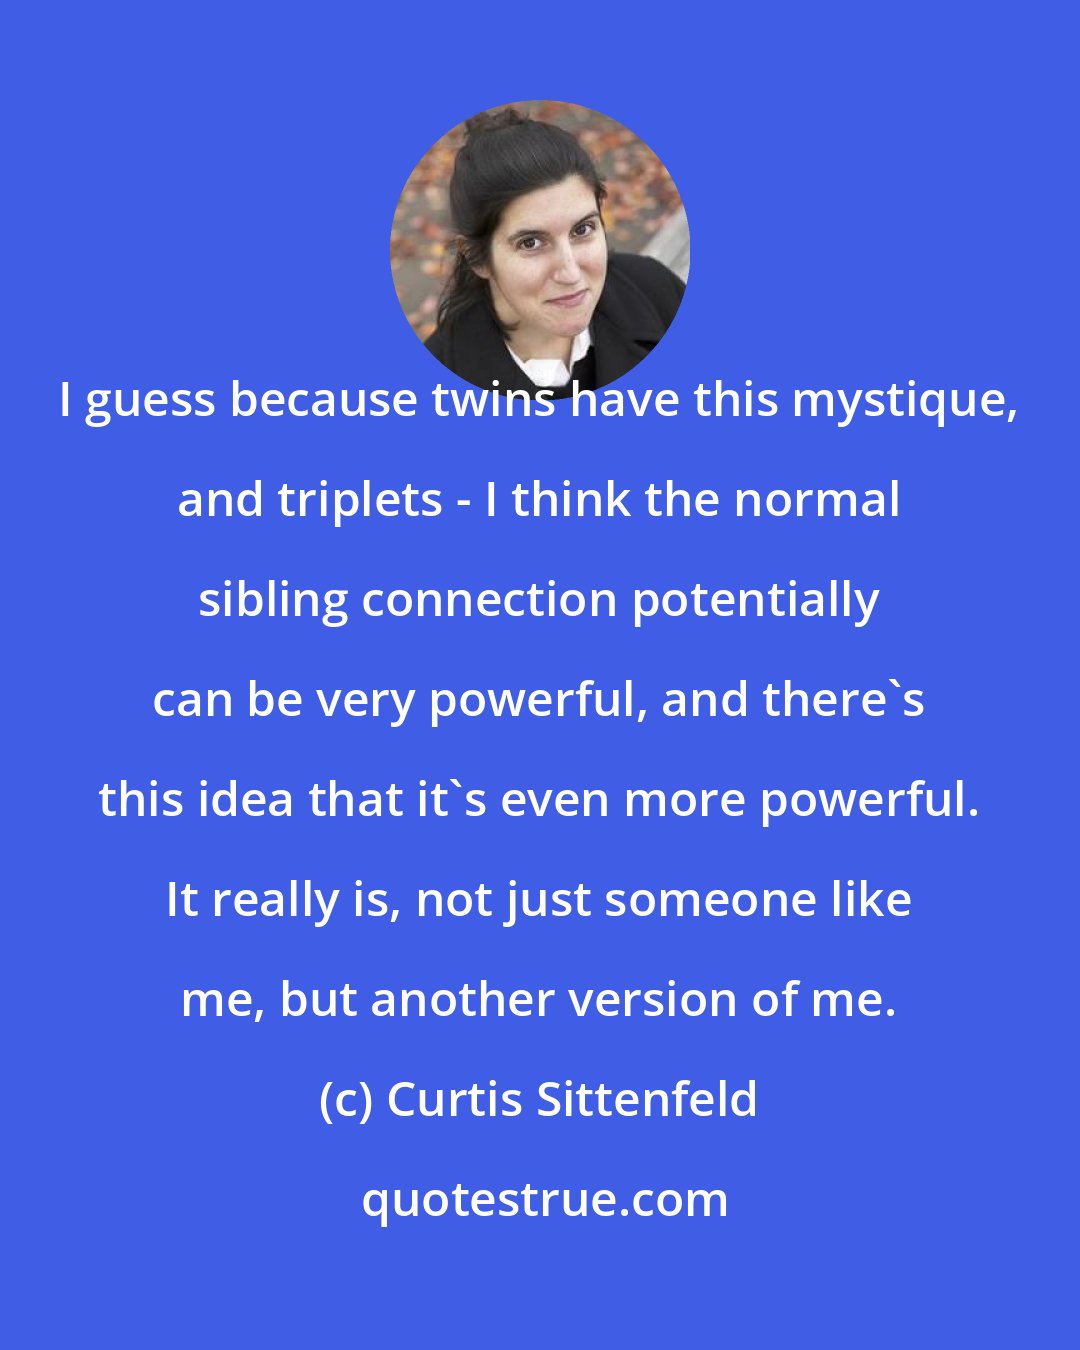 Curtis Sittenfeld: I guess because twins have this mystique, and triplets - I think the normal sibling connection potentially can be very powerful, and there's this idea that it's even more powerful. It really is, not just someone like me, but another version of me.